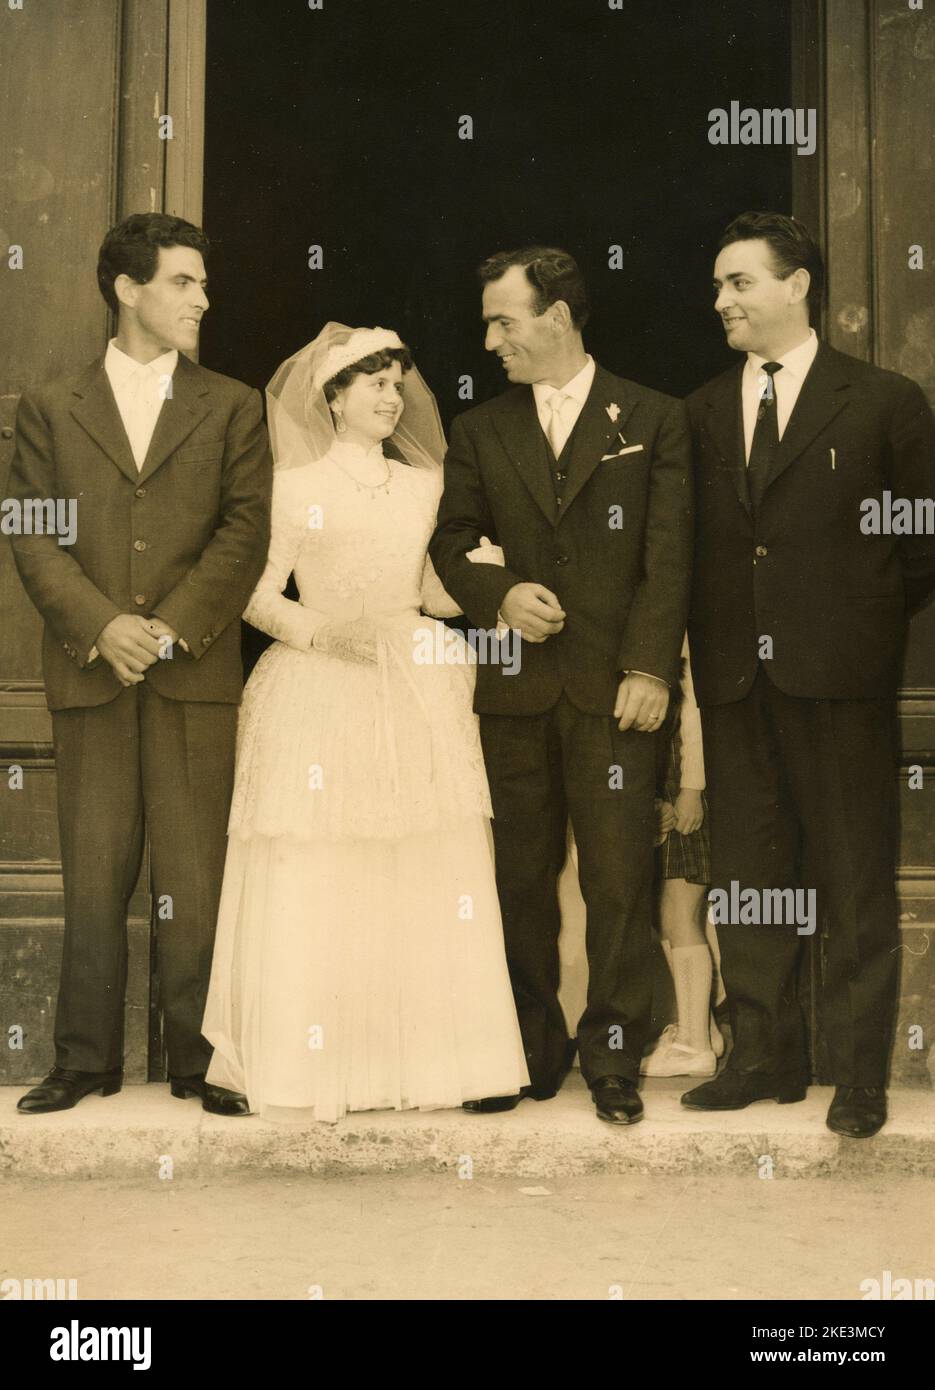 Wedding in a village in central Italy: The Bride and the Groom just married out of the church with the best men, 1950s Stock Photo